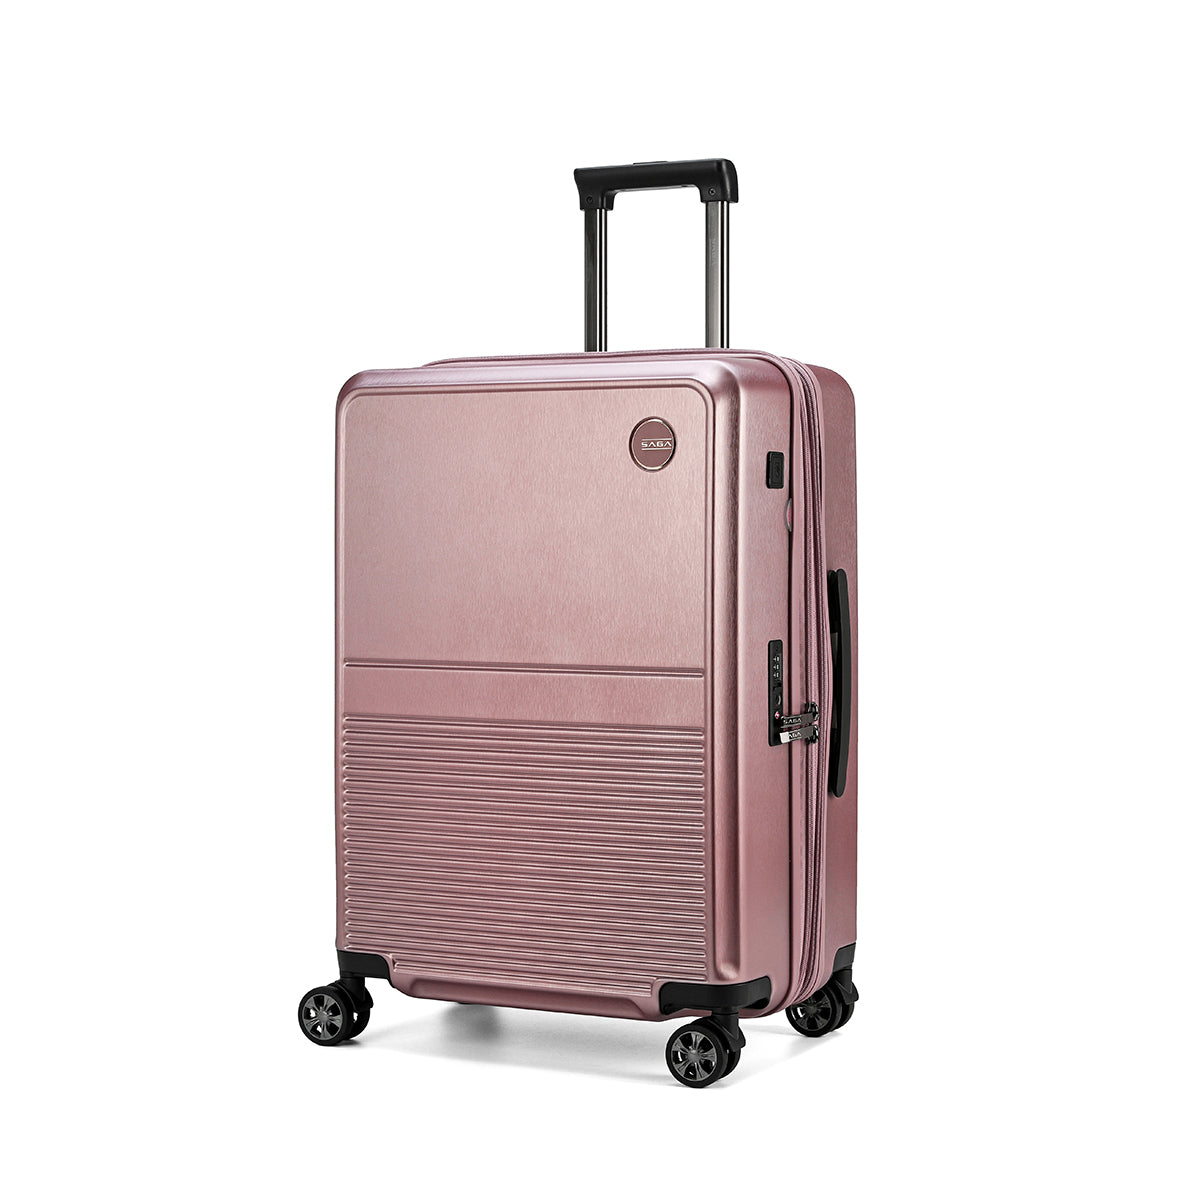 Fashionable and durable travel bags made of 100% durable polycarbonate in several sizes and colors